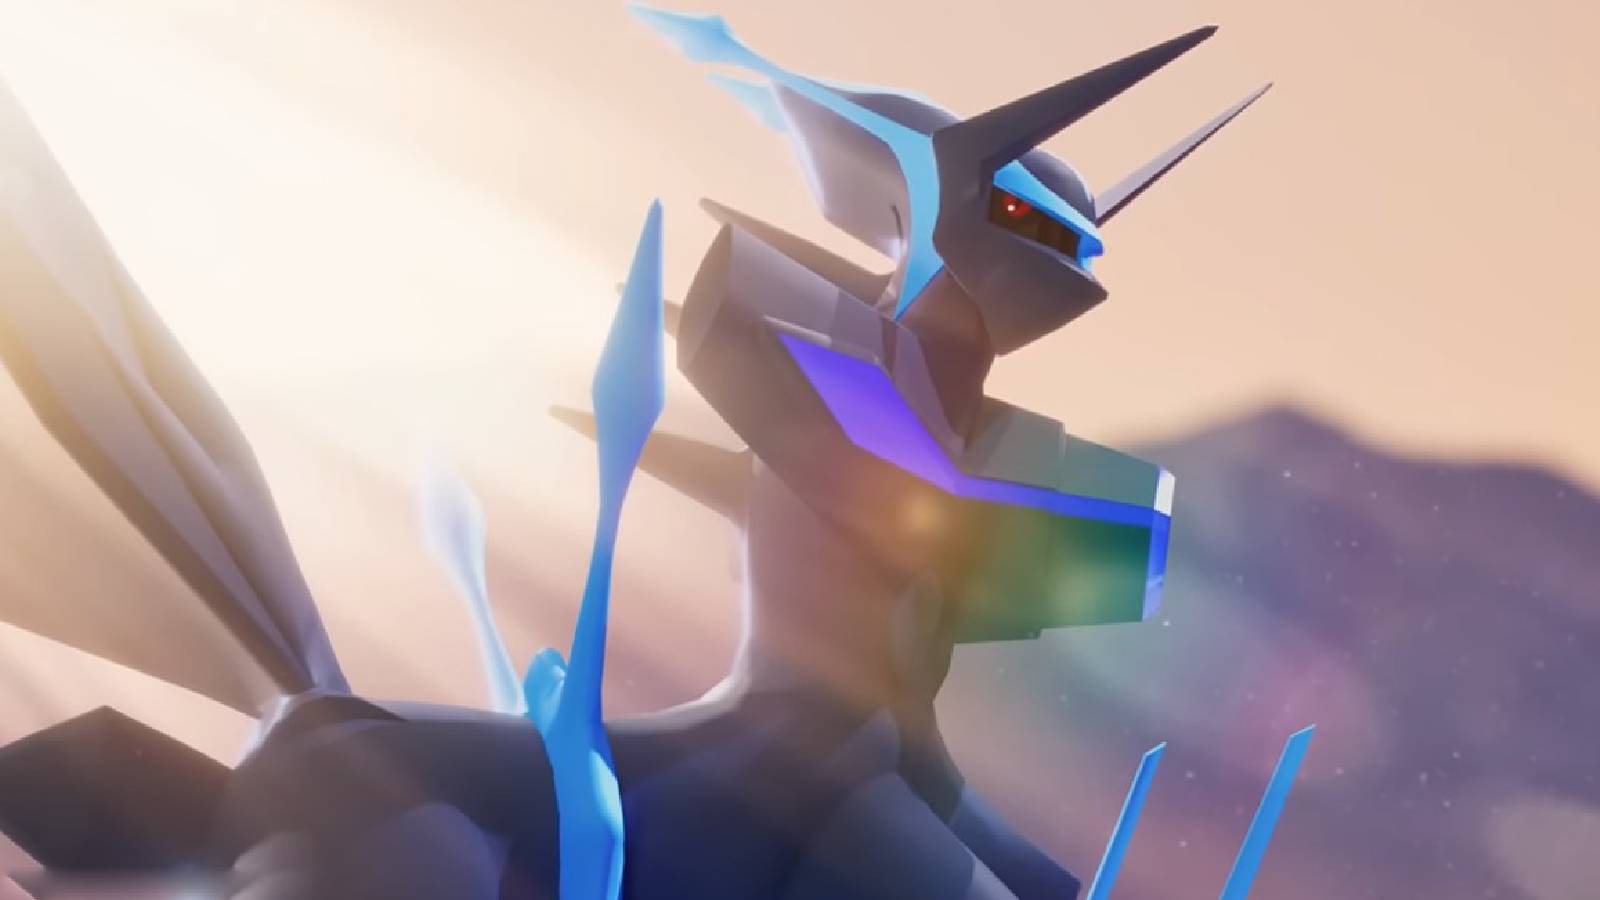 The Pokemon Origin Forme Dialga is visible in a close up shot